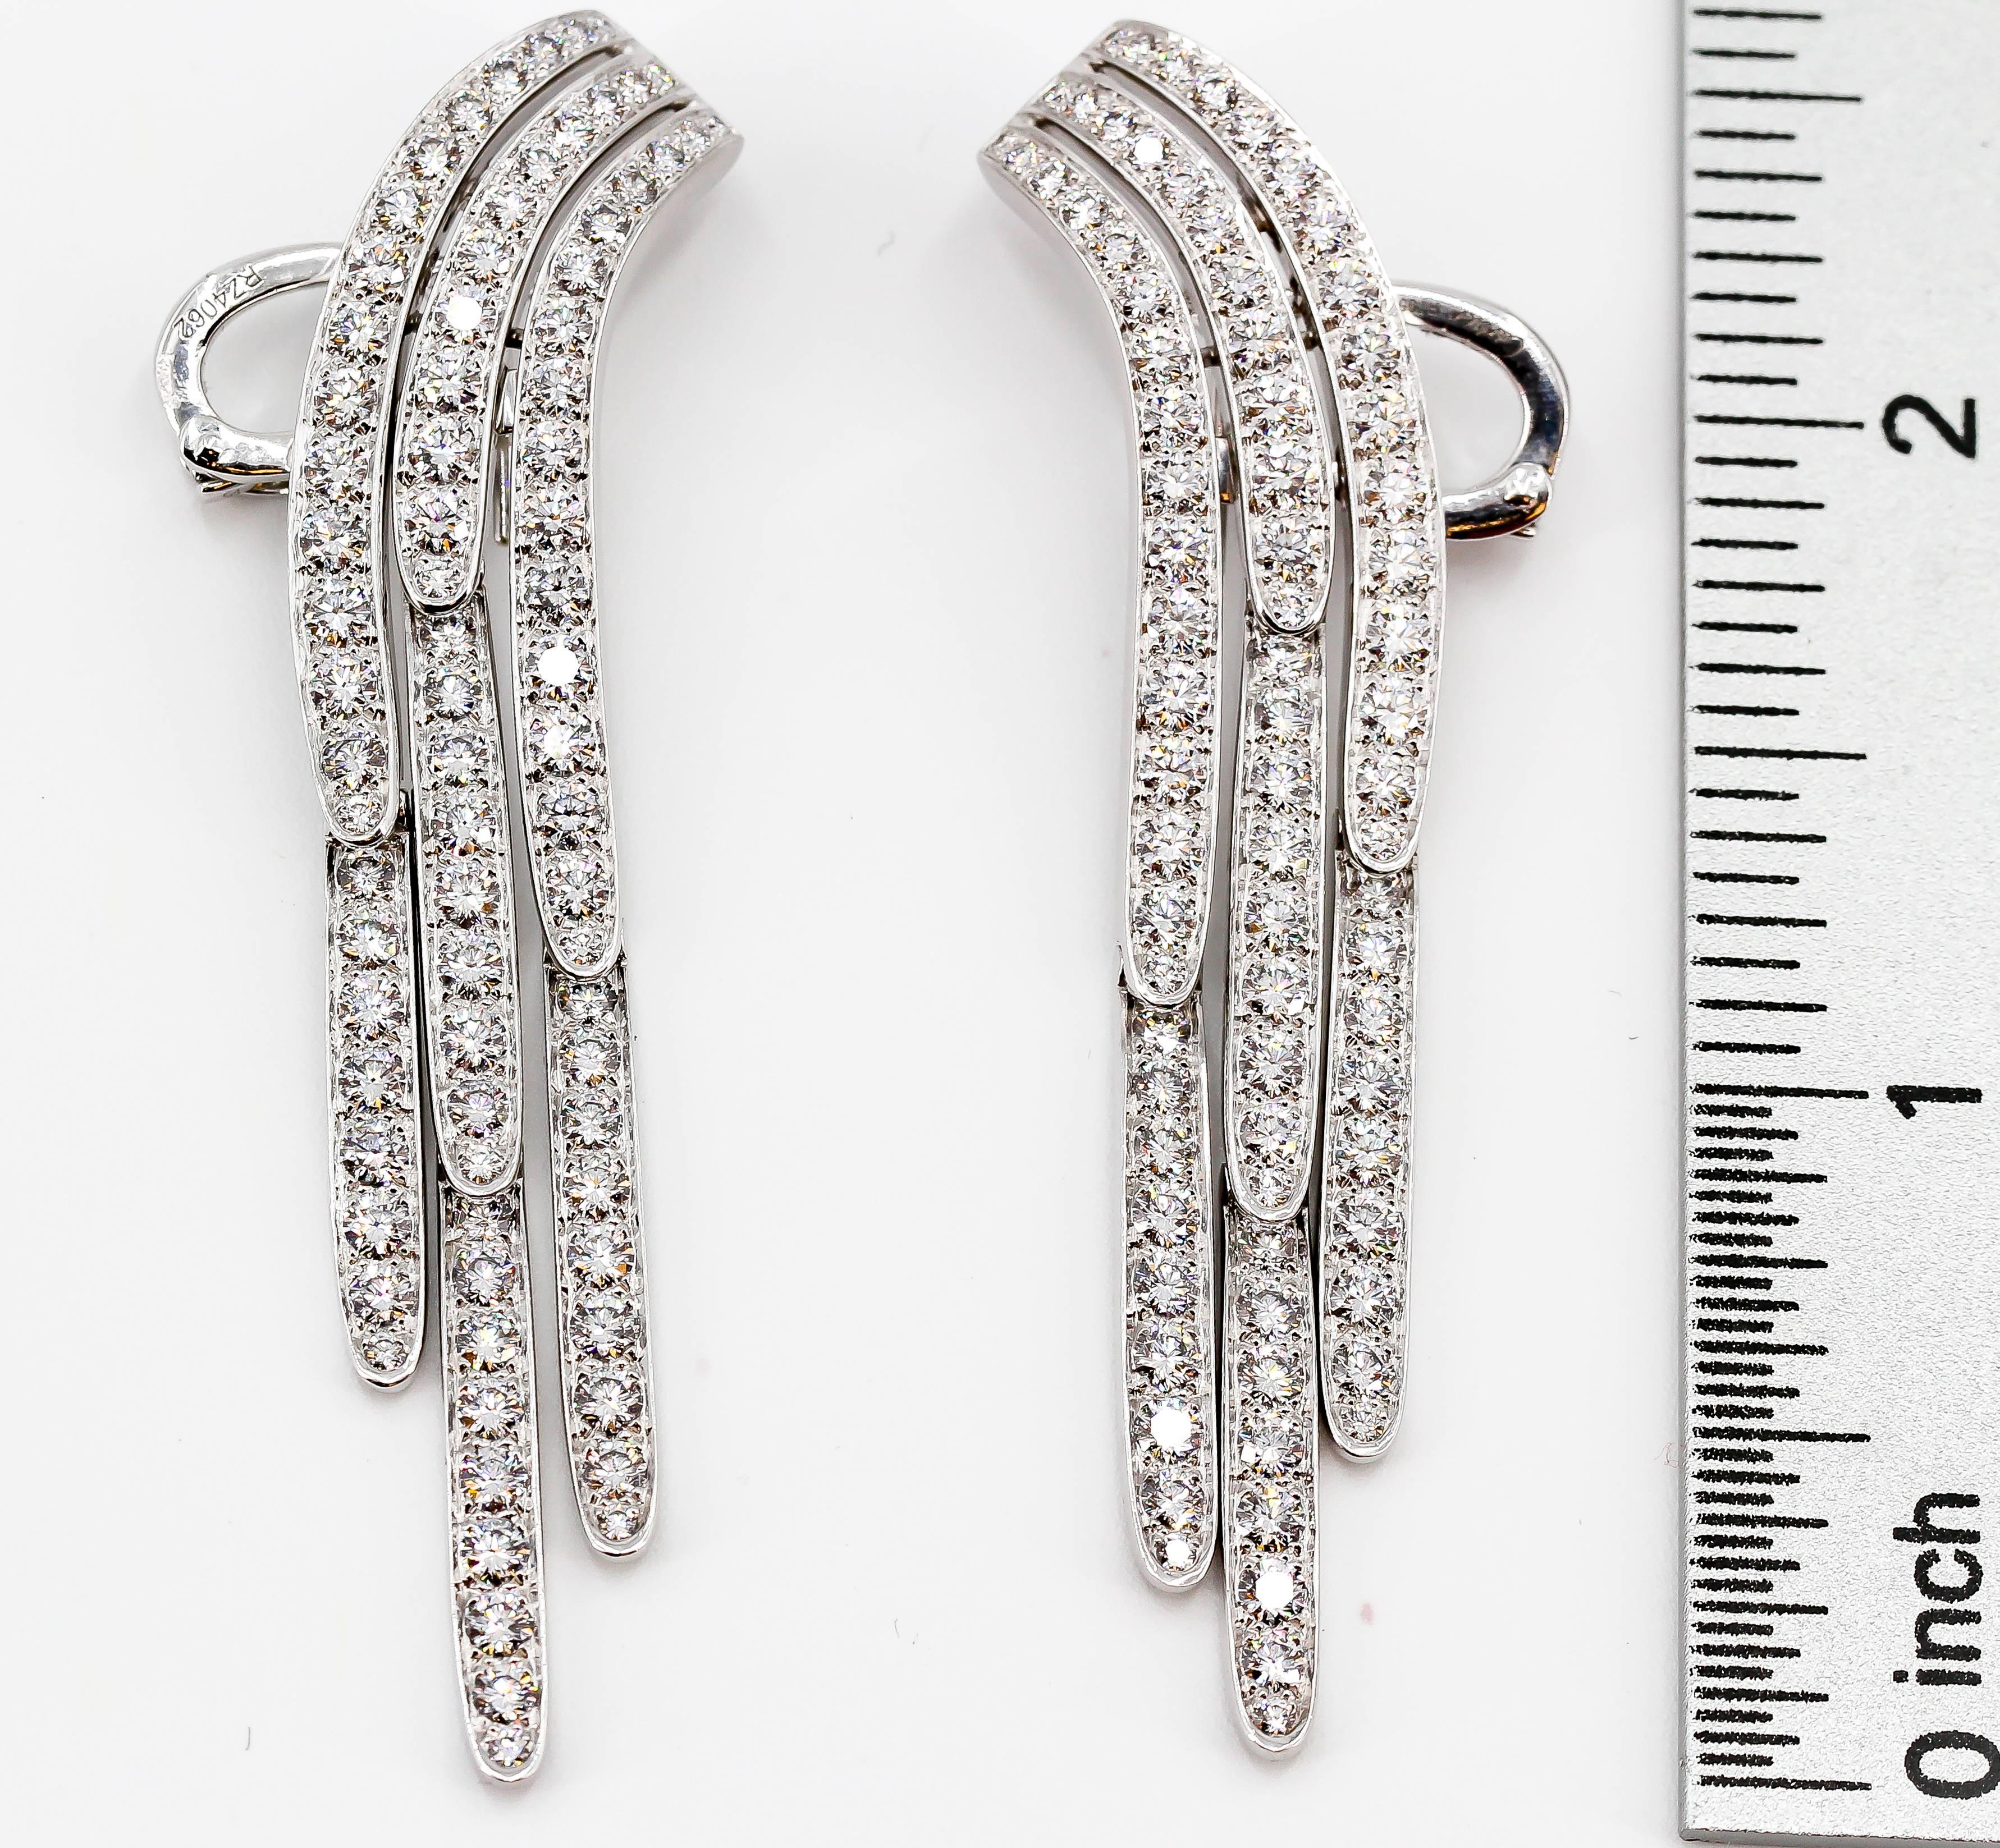 Chic diamond and platinum drop earrings by Cartier. They feature very high grade round brilliant cut diamonds of approx. E-G color, VVs clarity, total diamond weight approx. 10 carats.

Hallmarks: Cartier, PT950, reference numbers, French platinum